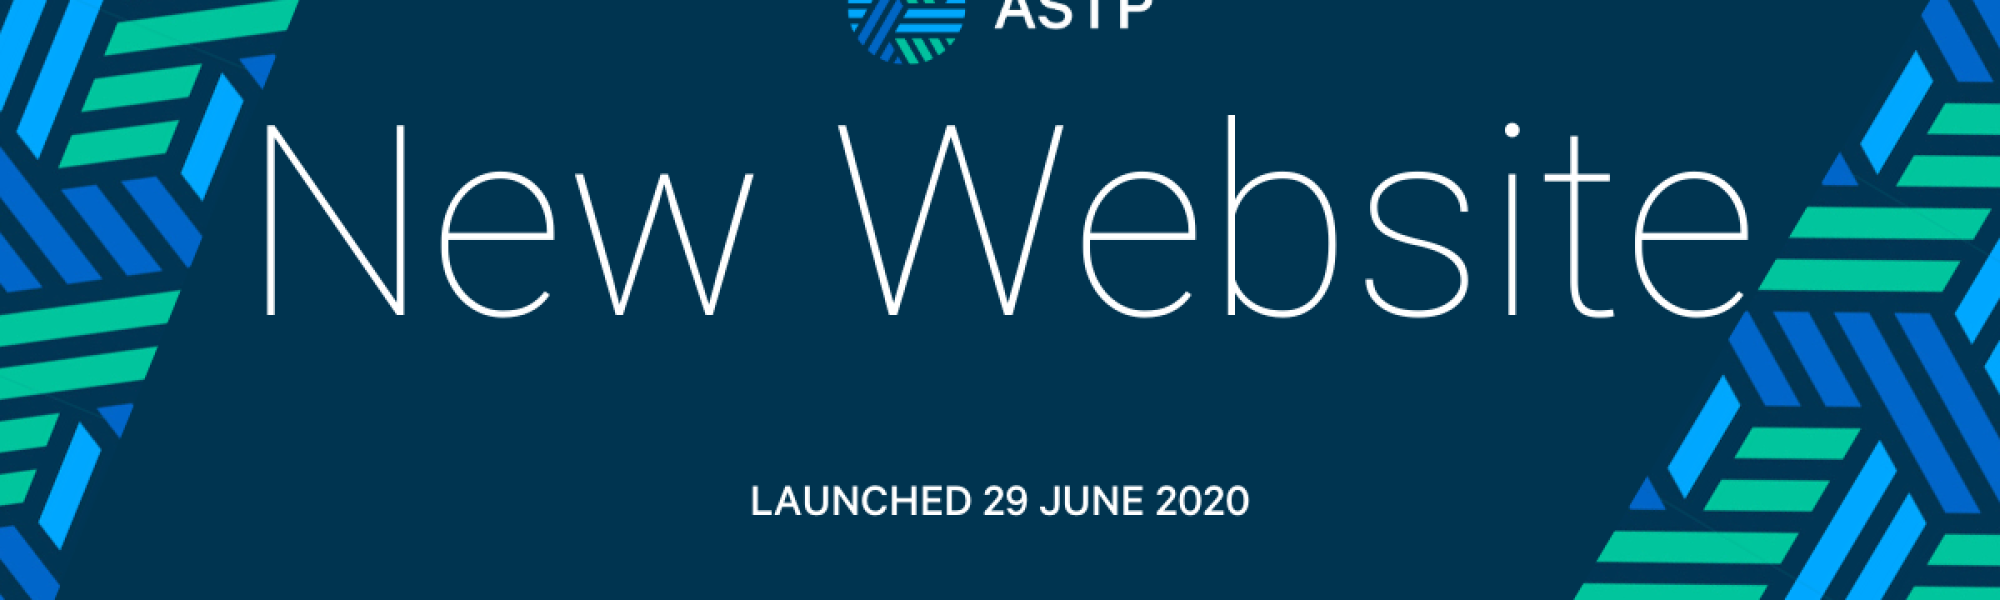 ASTP - New Website Launched